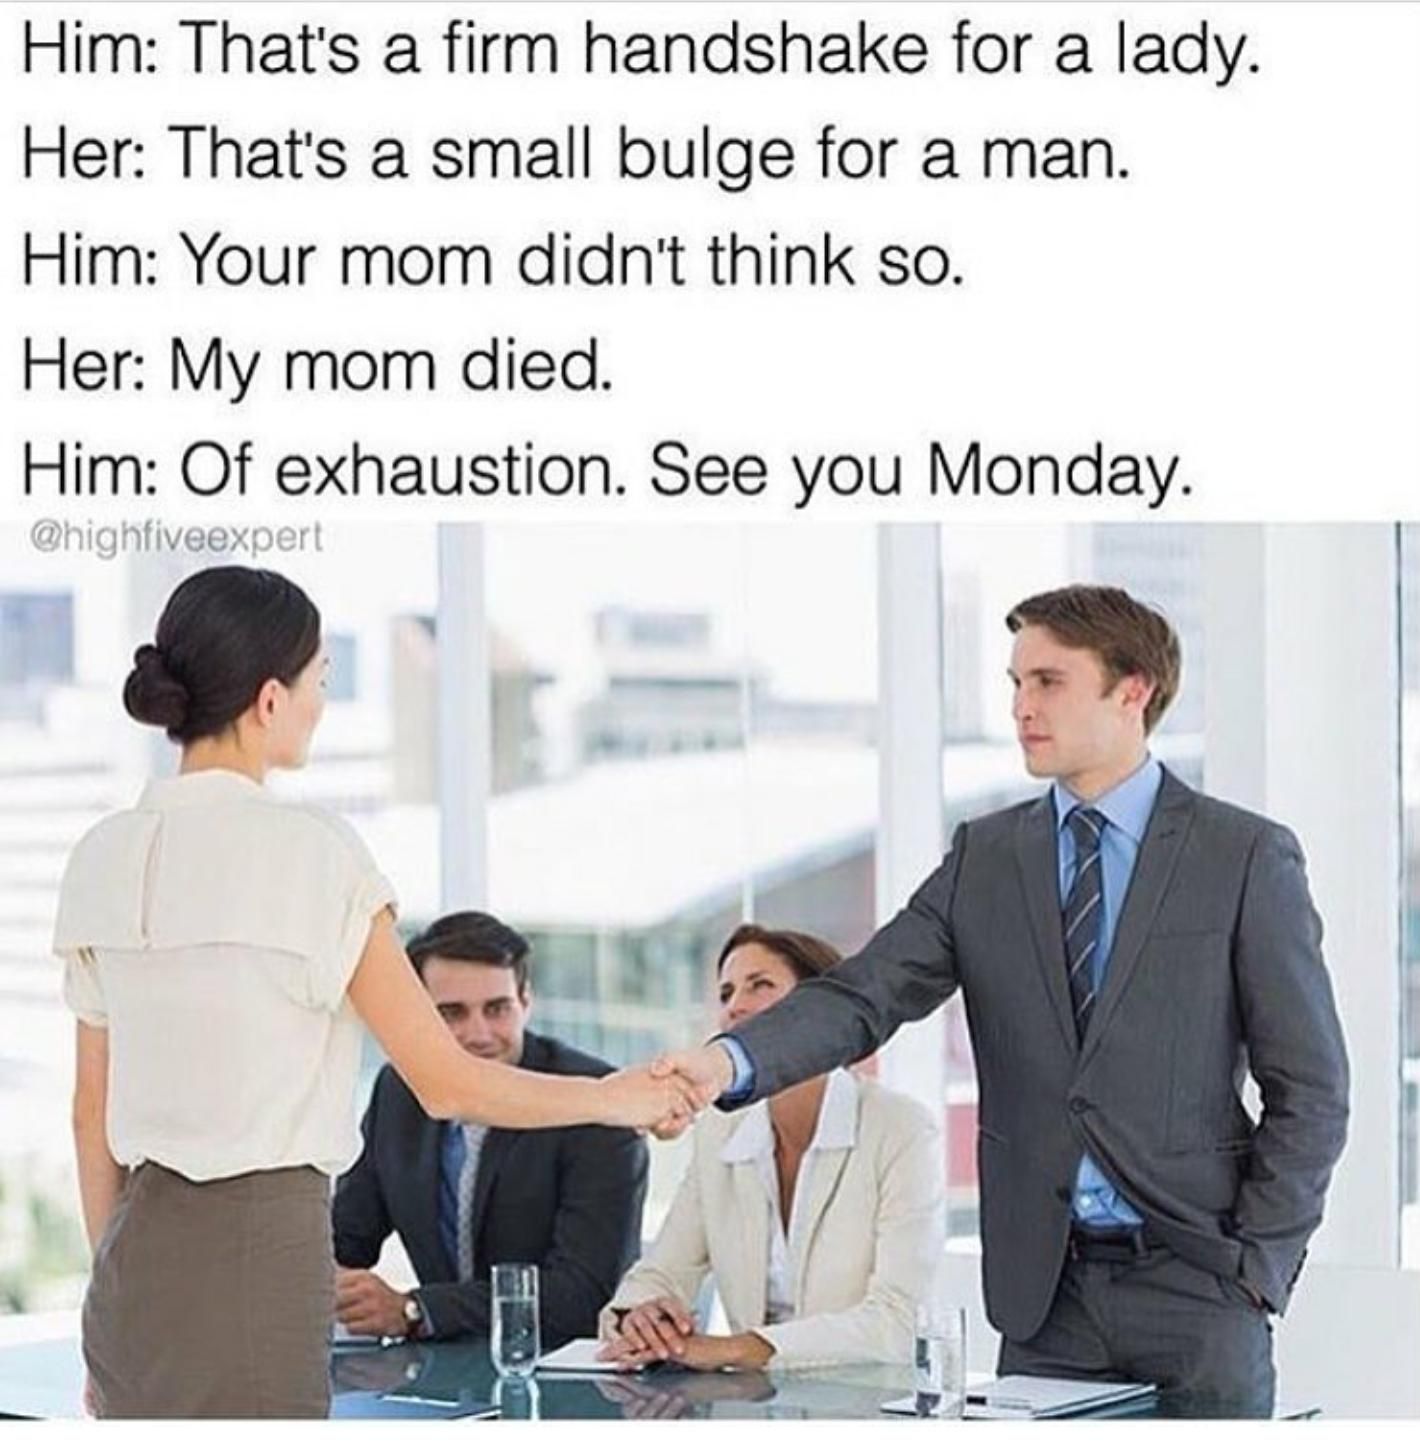 firm handshake meme - Him That's a firm handshake for a lady. Her That's a small bulge for a man. Him Your mom didn't think so. Her My mom died. Him Of exhaustion. See you Monday.